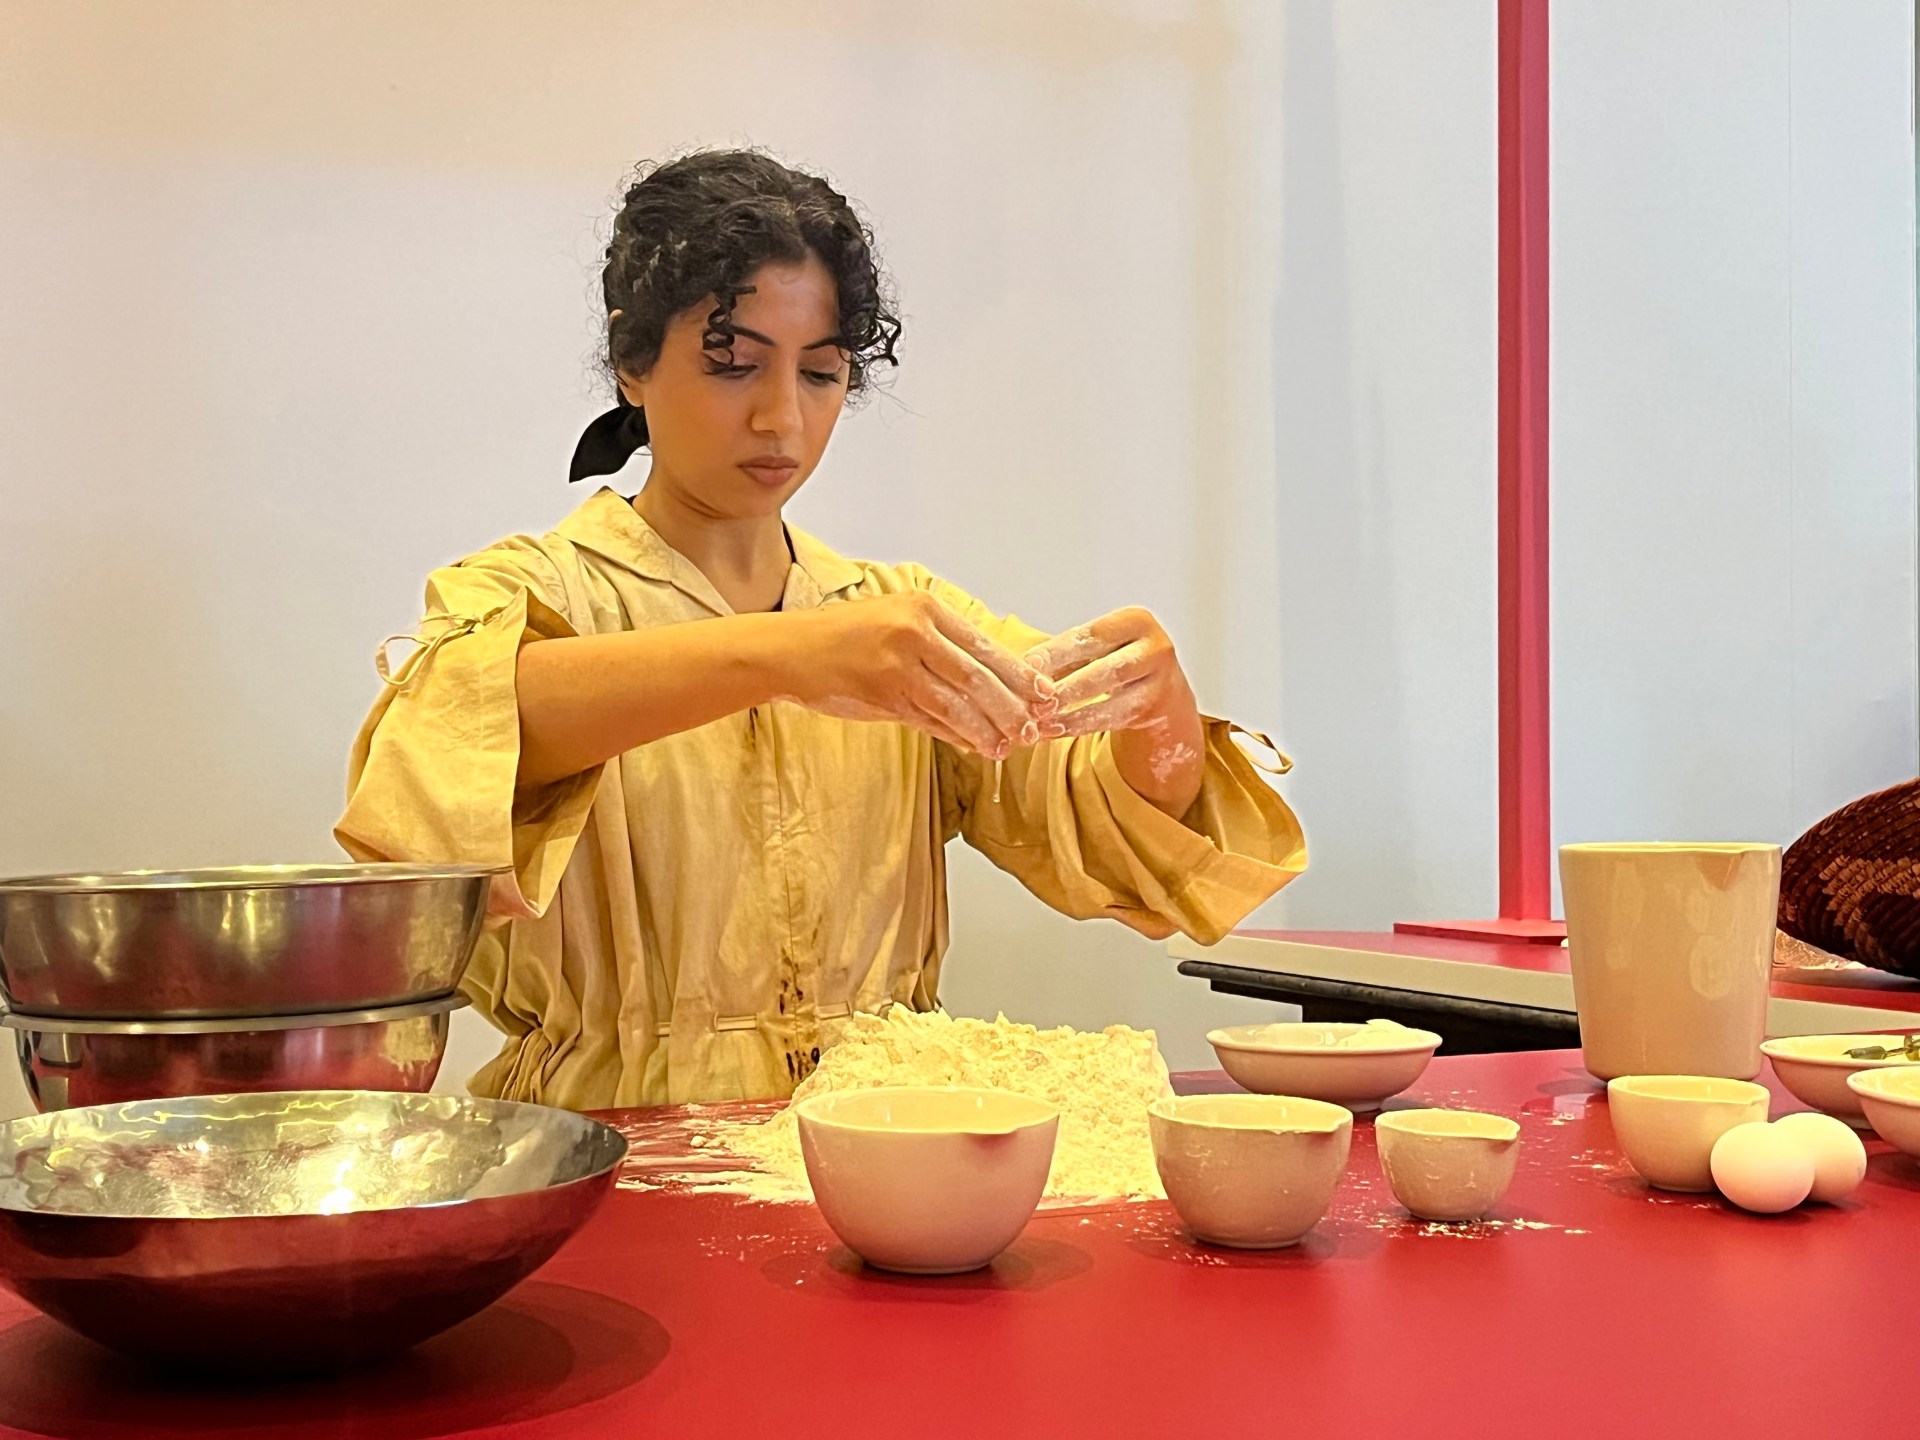 Almatrooshi during her performance The Alphabetics of the Baker at Art Dubai. Photo by Maghie Ghali